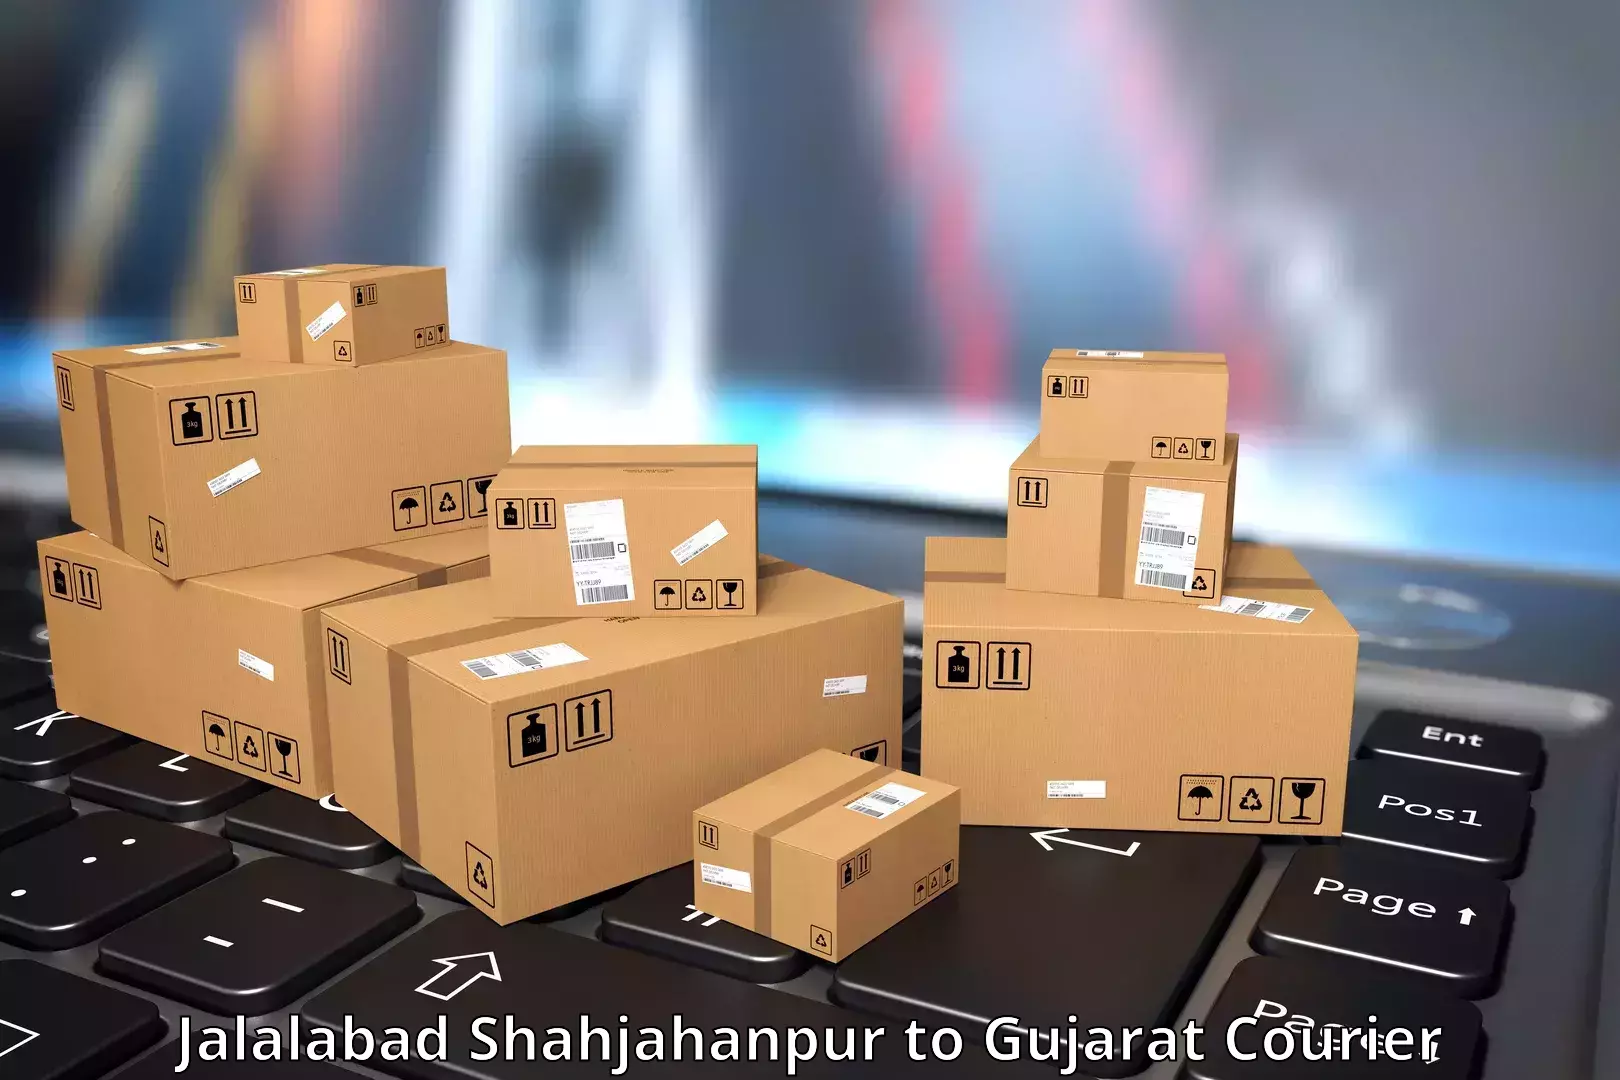 Package delivery network Jalalabad Shahjahanpur to Manavadar